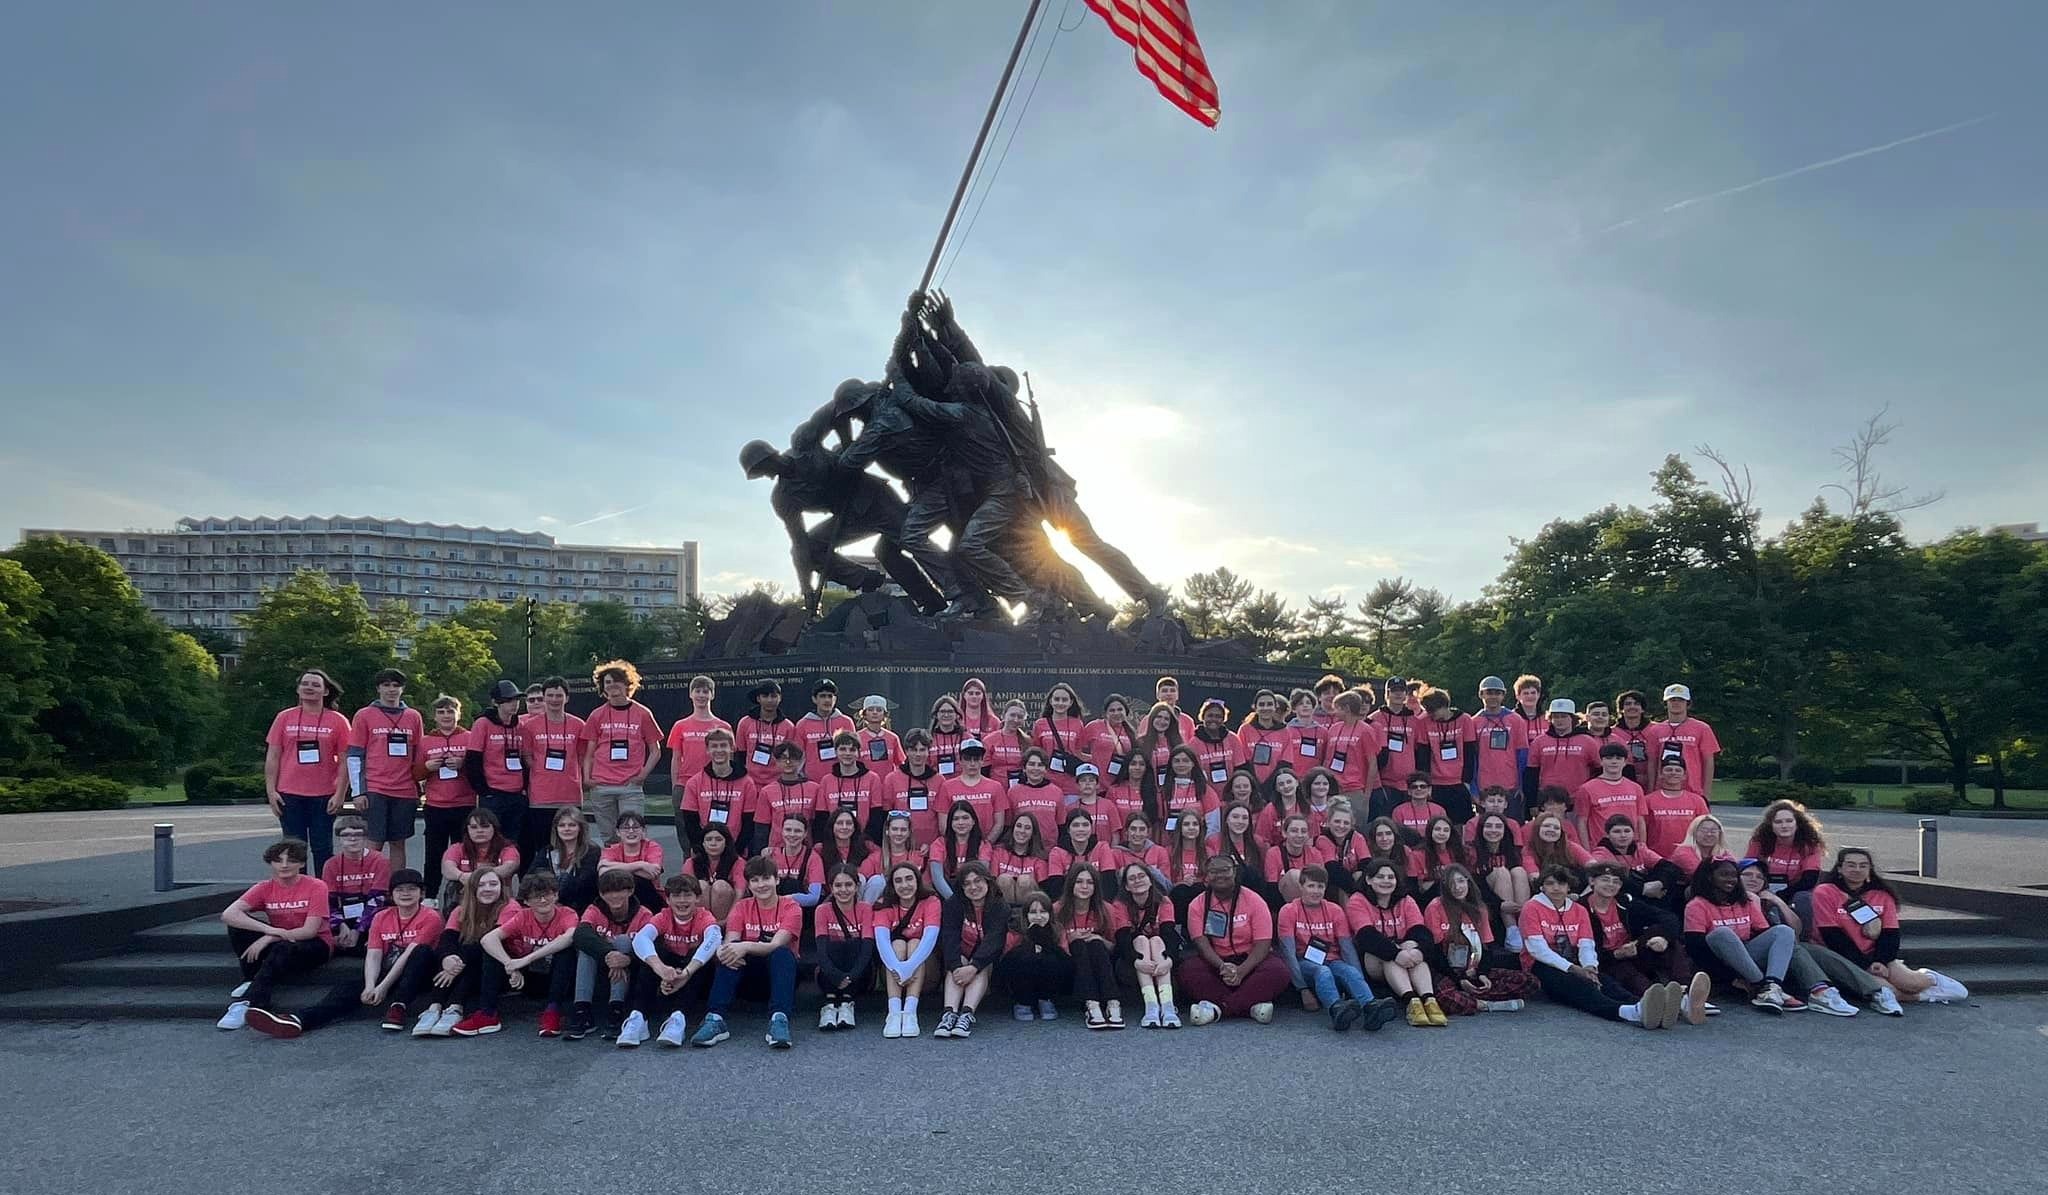 group of students pose in front of Iwo Jima memorial